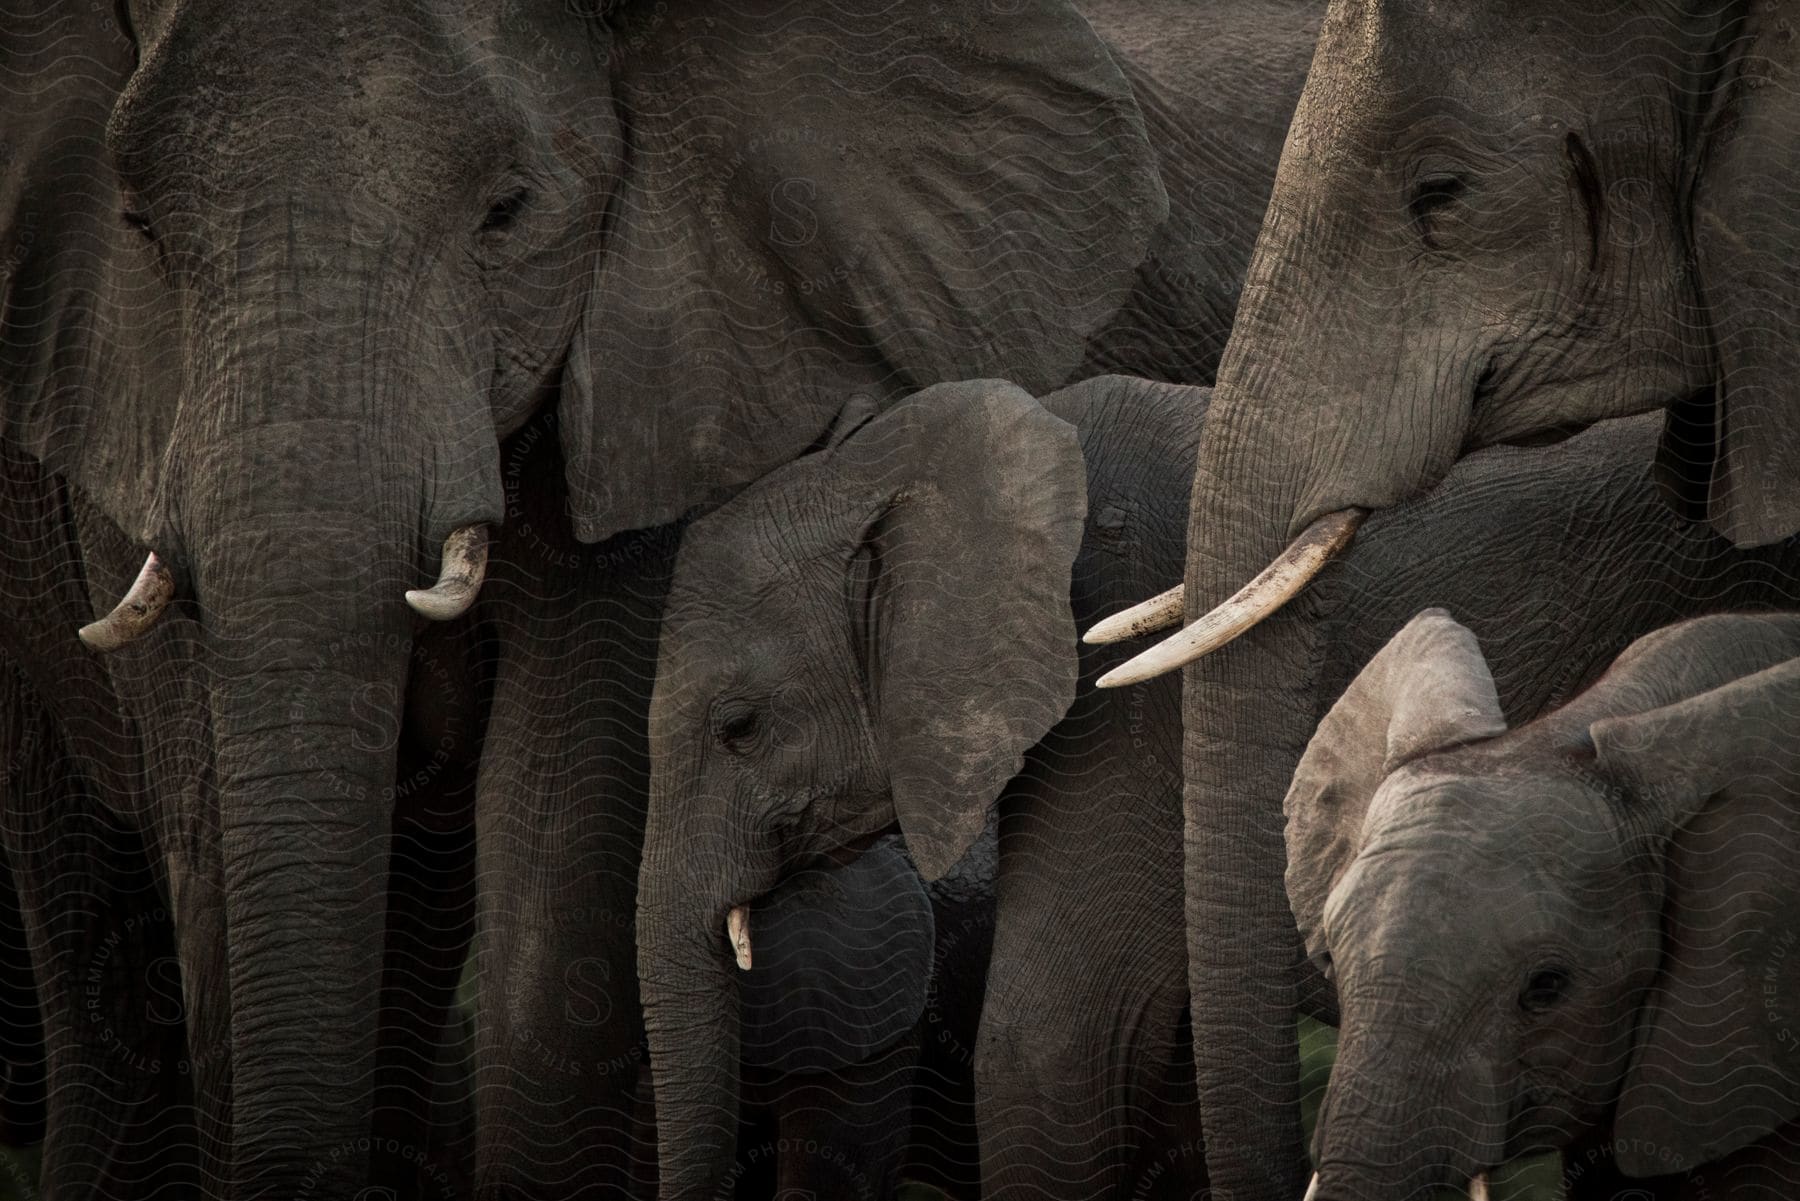 A group of elephants standing outdoors